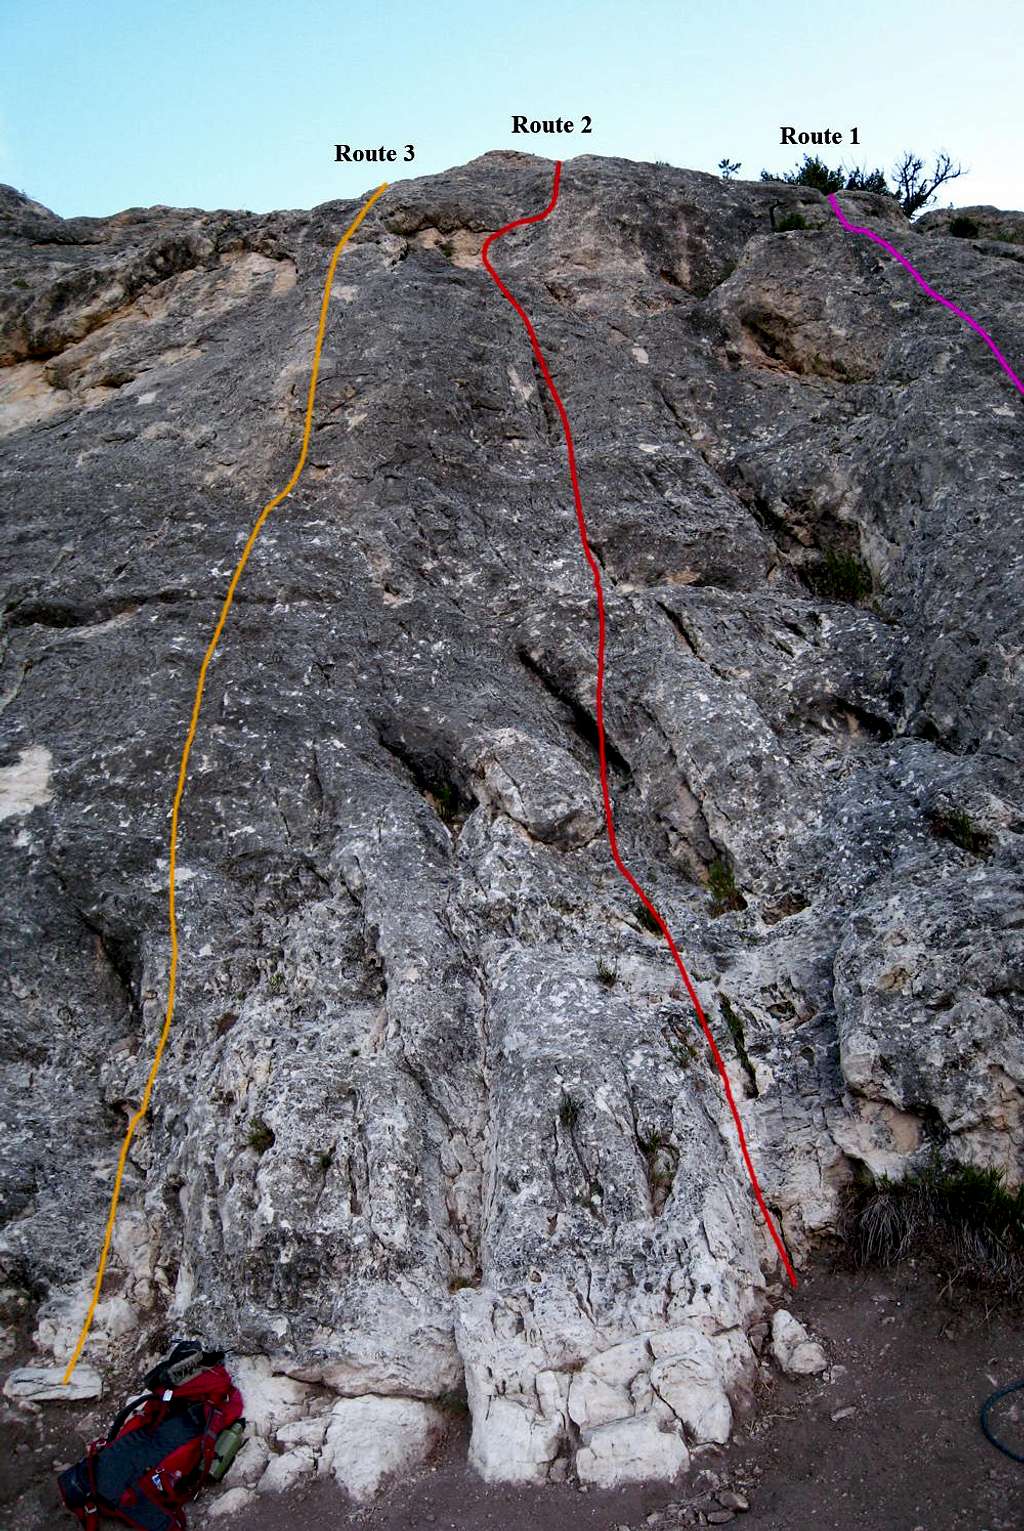 Looking up routes 1-3